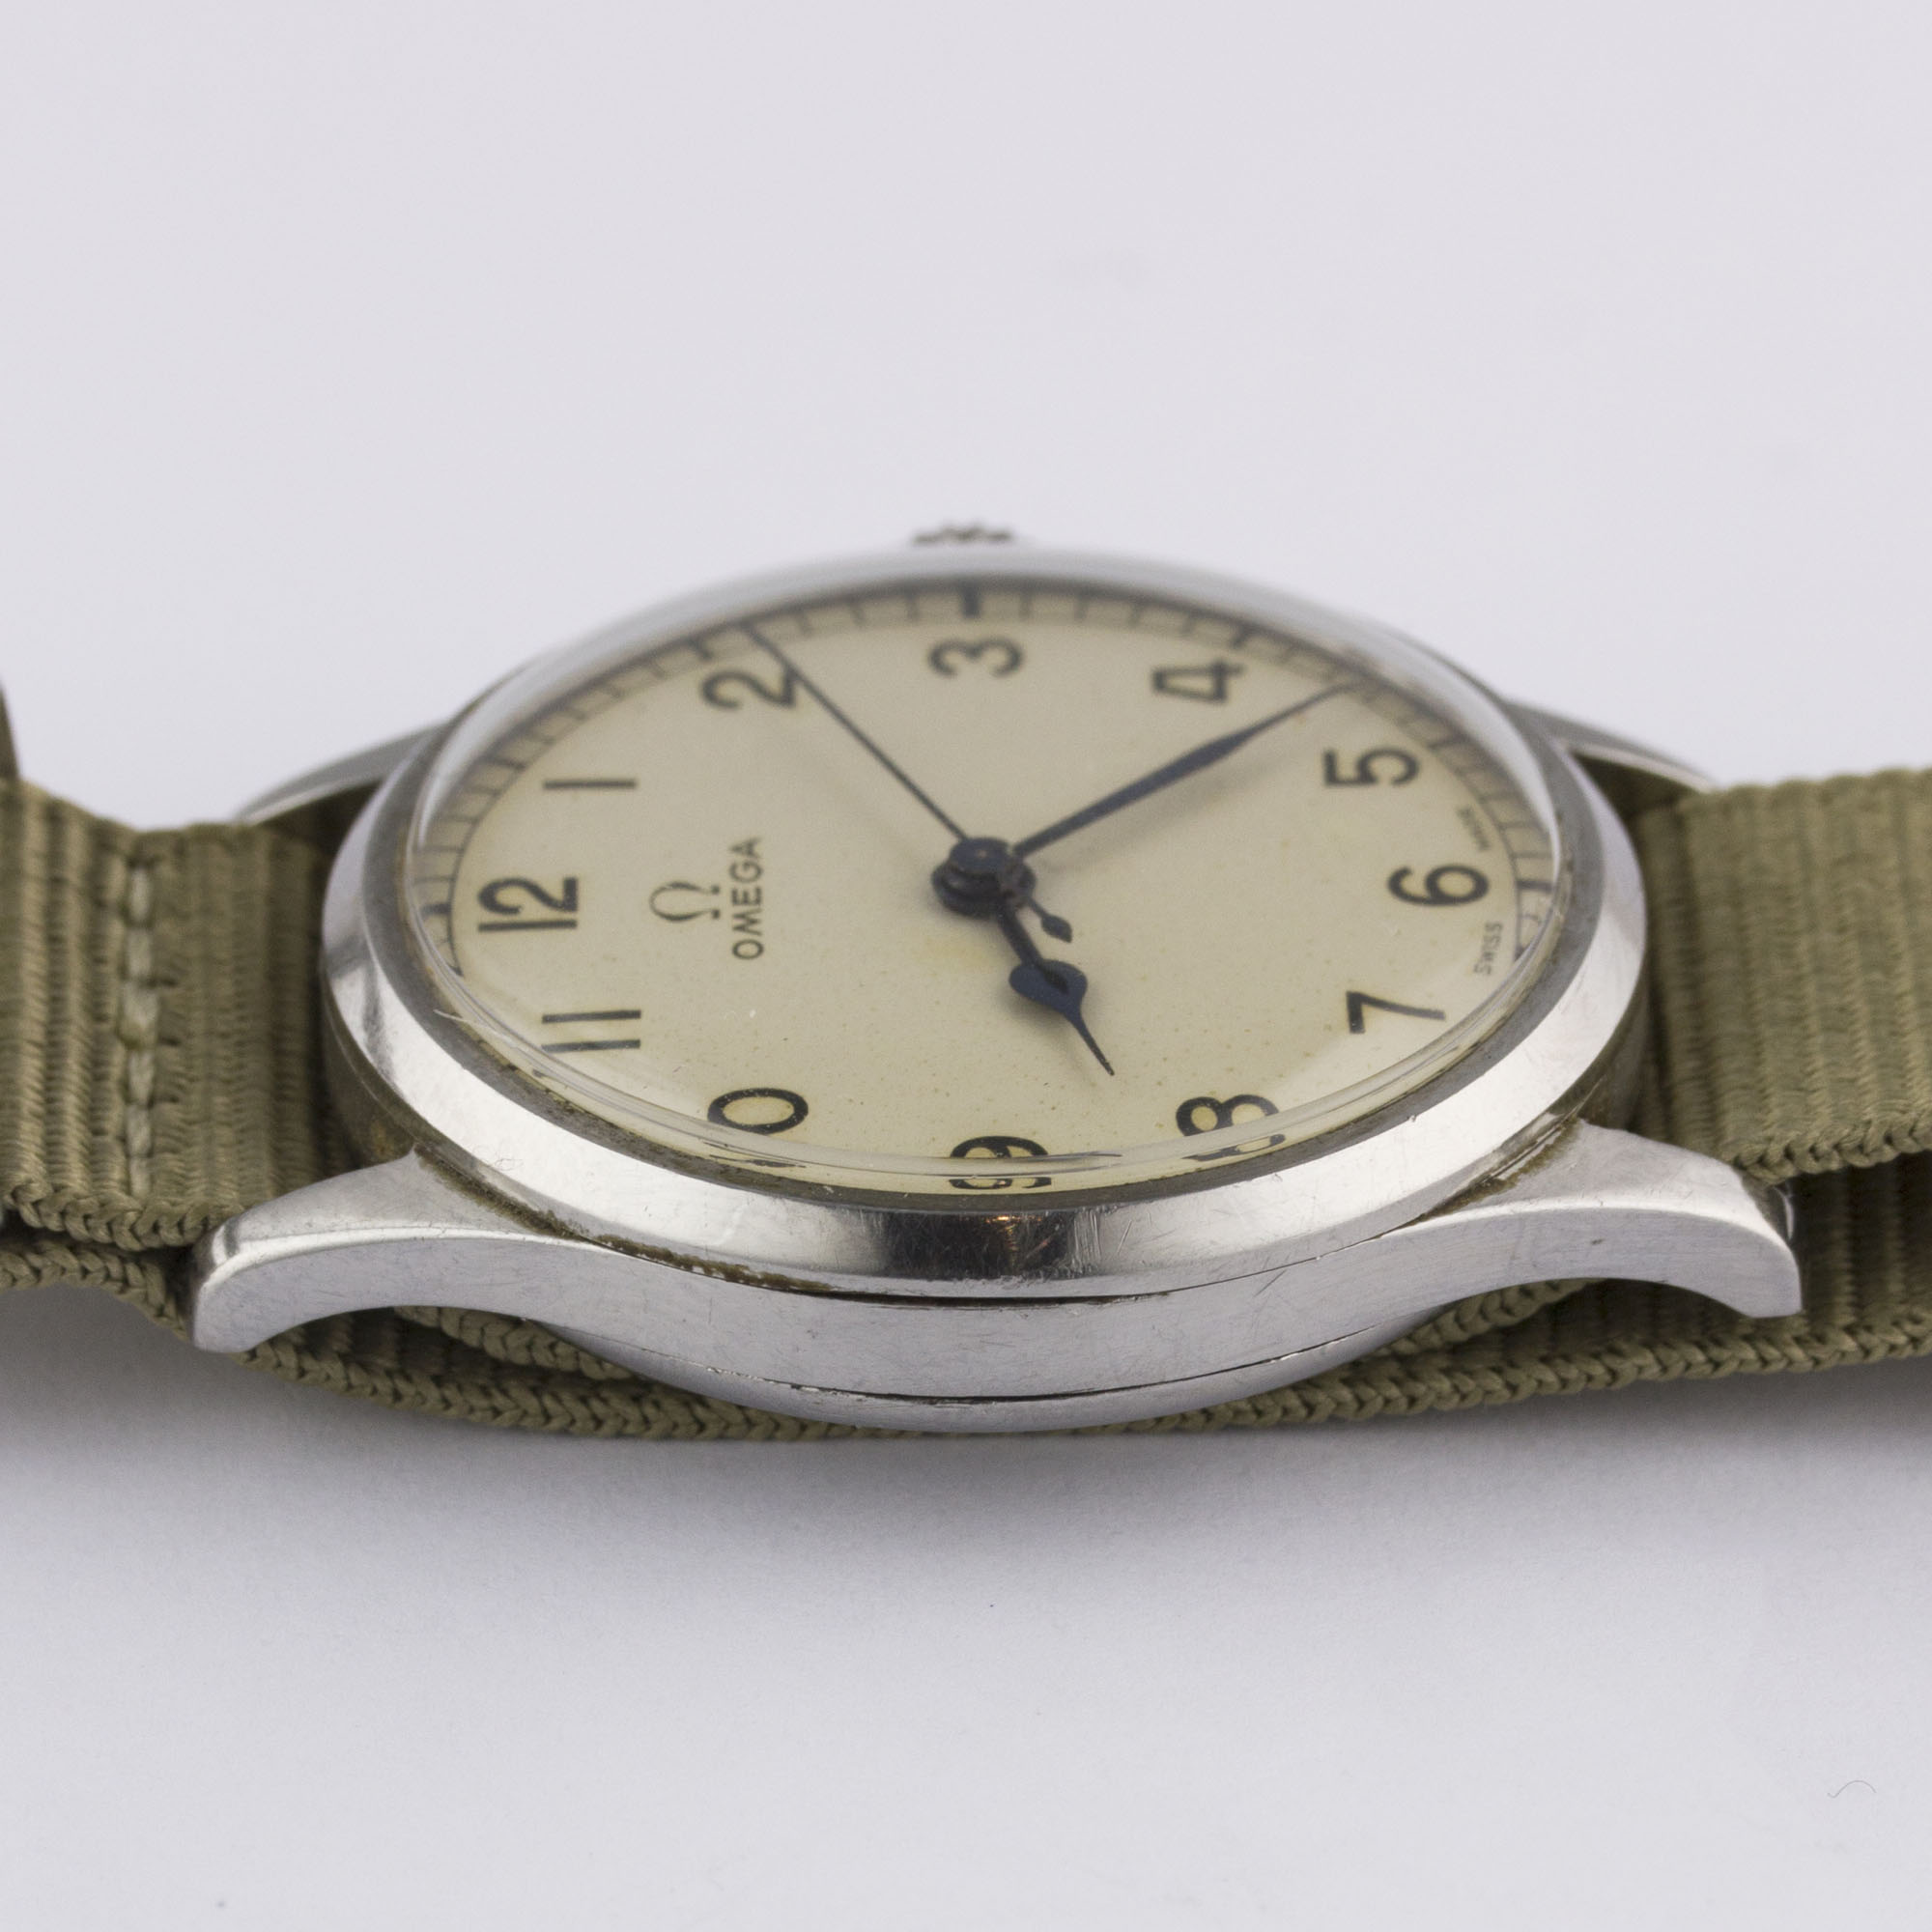 A GENTLEMAN'S STAINLESS STEEL BRITISH MILITARY OMEGA RAF PILOTS WRIST WATCH CIRCA 1940 Movement: - Image 10 of 10